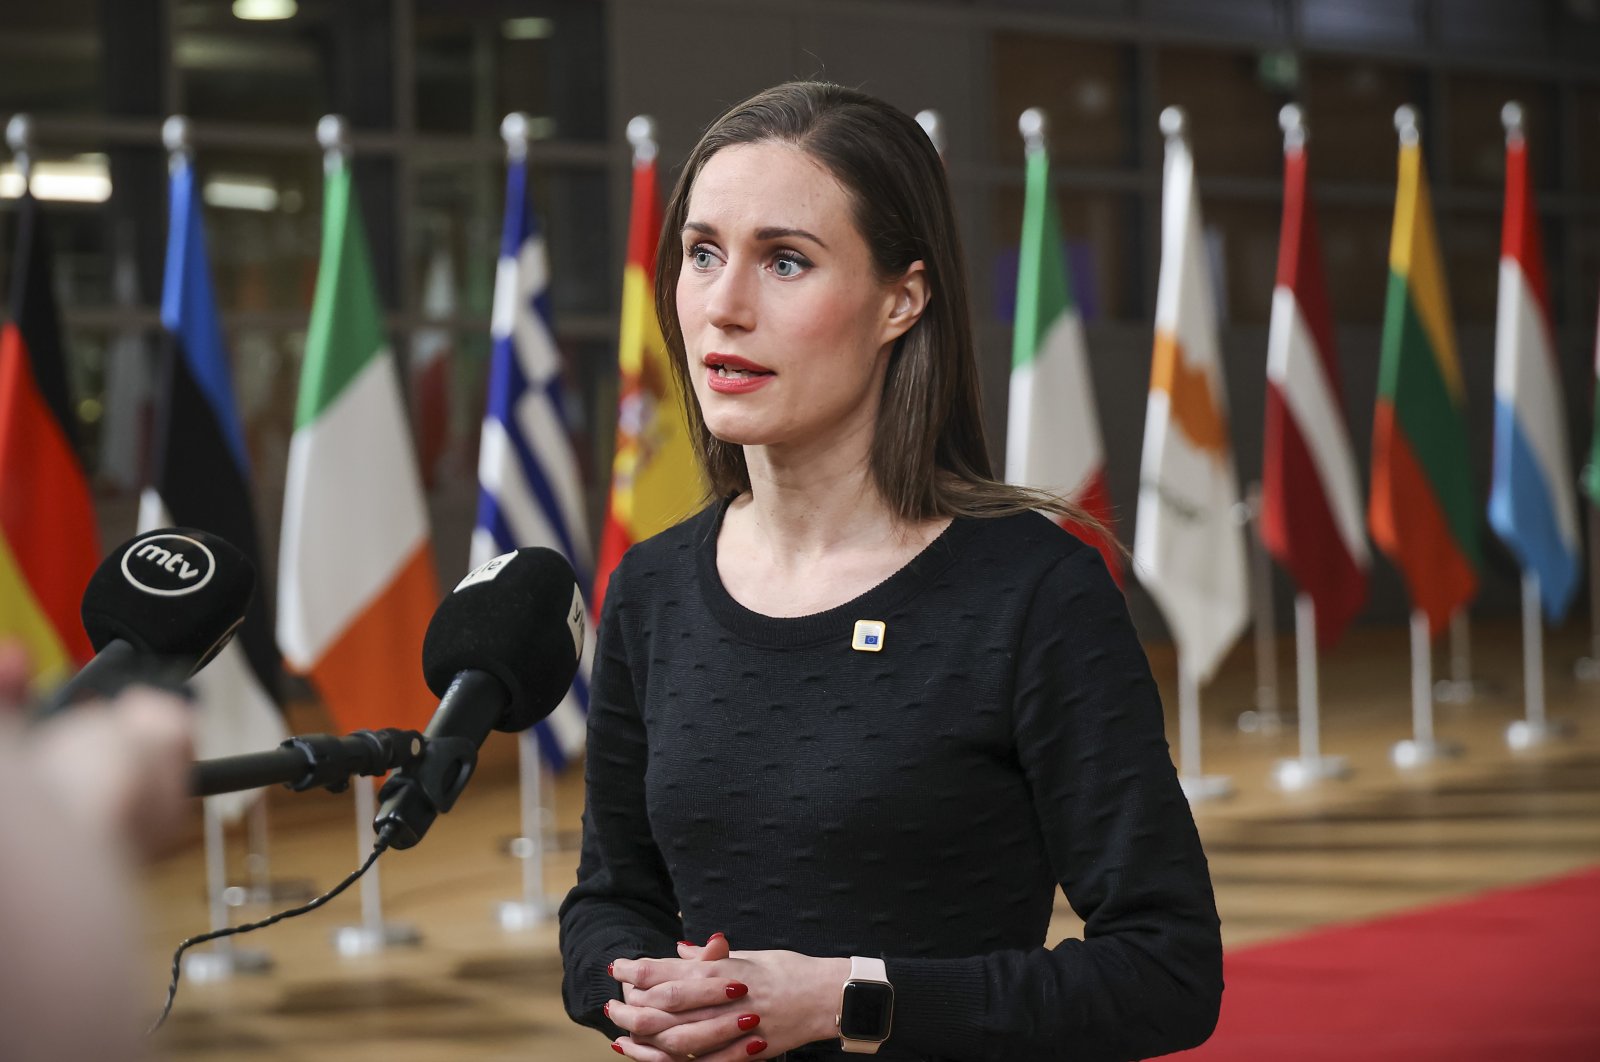 Prime Minister of Finland Sanna Marin speaks with the media during a press briefing, at the European Council in Brussels, Belgium, Dec. 15, 2022. (Reuters Photo)